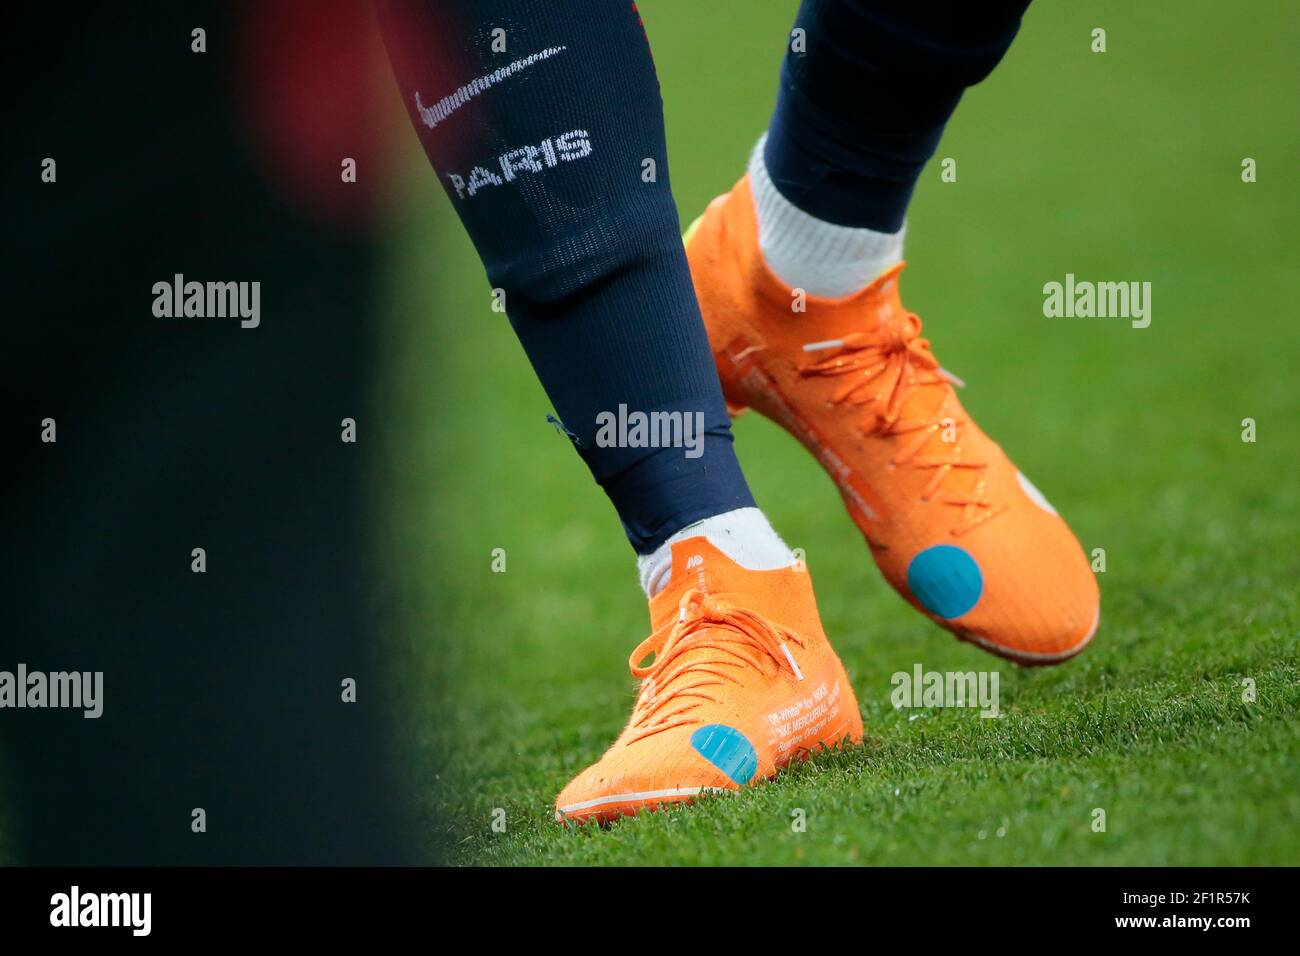 Shoes of Kylian Mbappe (PSG), ™ for 'Nike Mercurial Vapore' Oregon USA c. 'KNIT', during the French championship L1 football match between Paris Saint-Germain (PSG) and Monaco, on